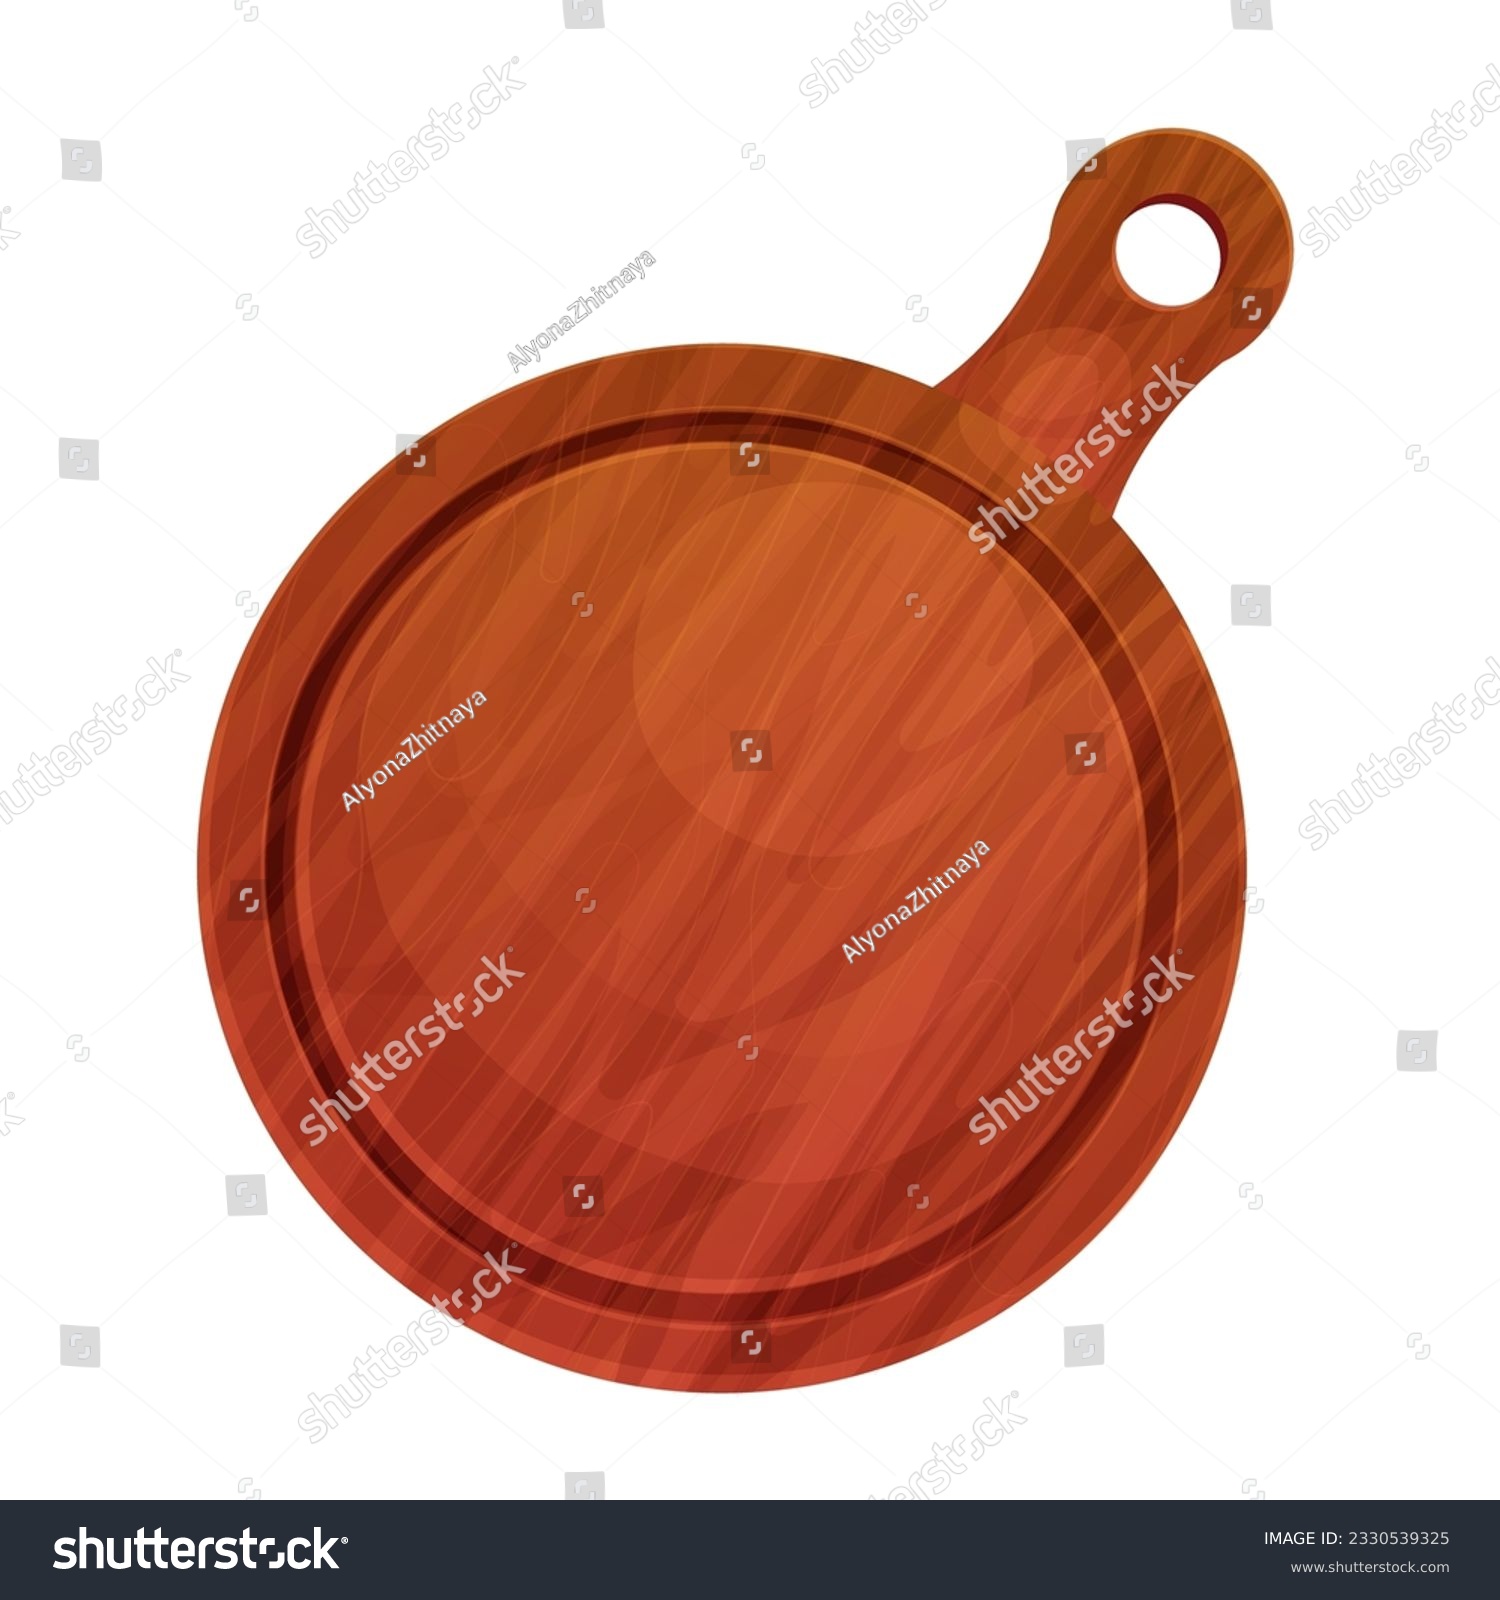 SVG of Wooden round pizza board, pate top view in cartoon style isolated on white background. Kitchen enpty cutting desk.  svg